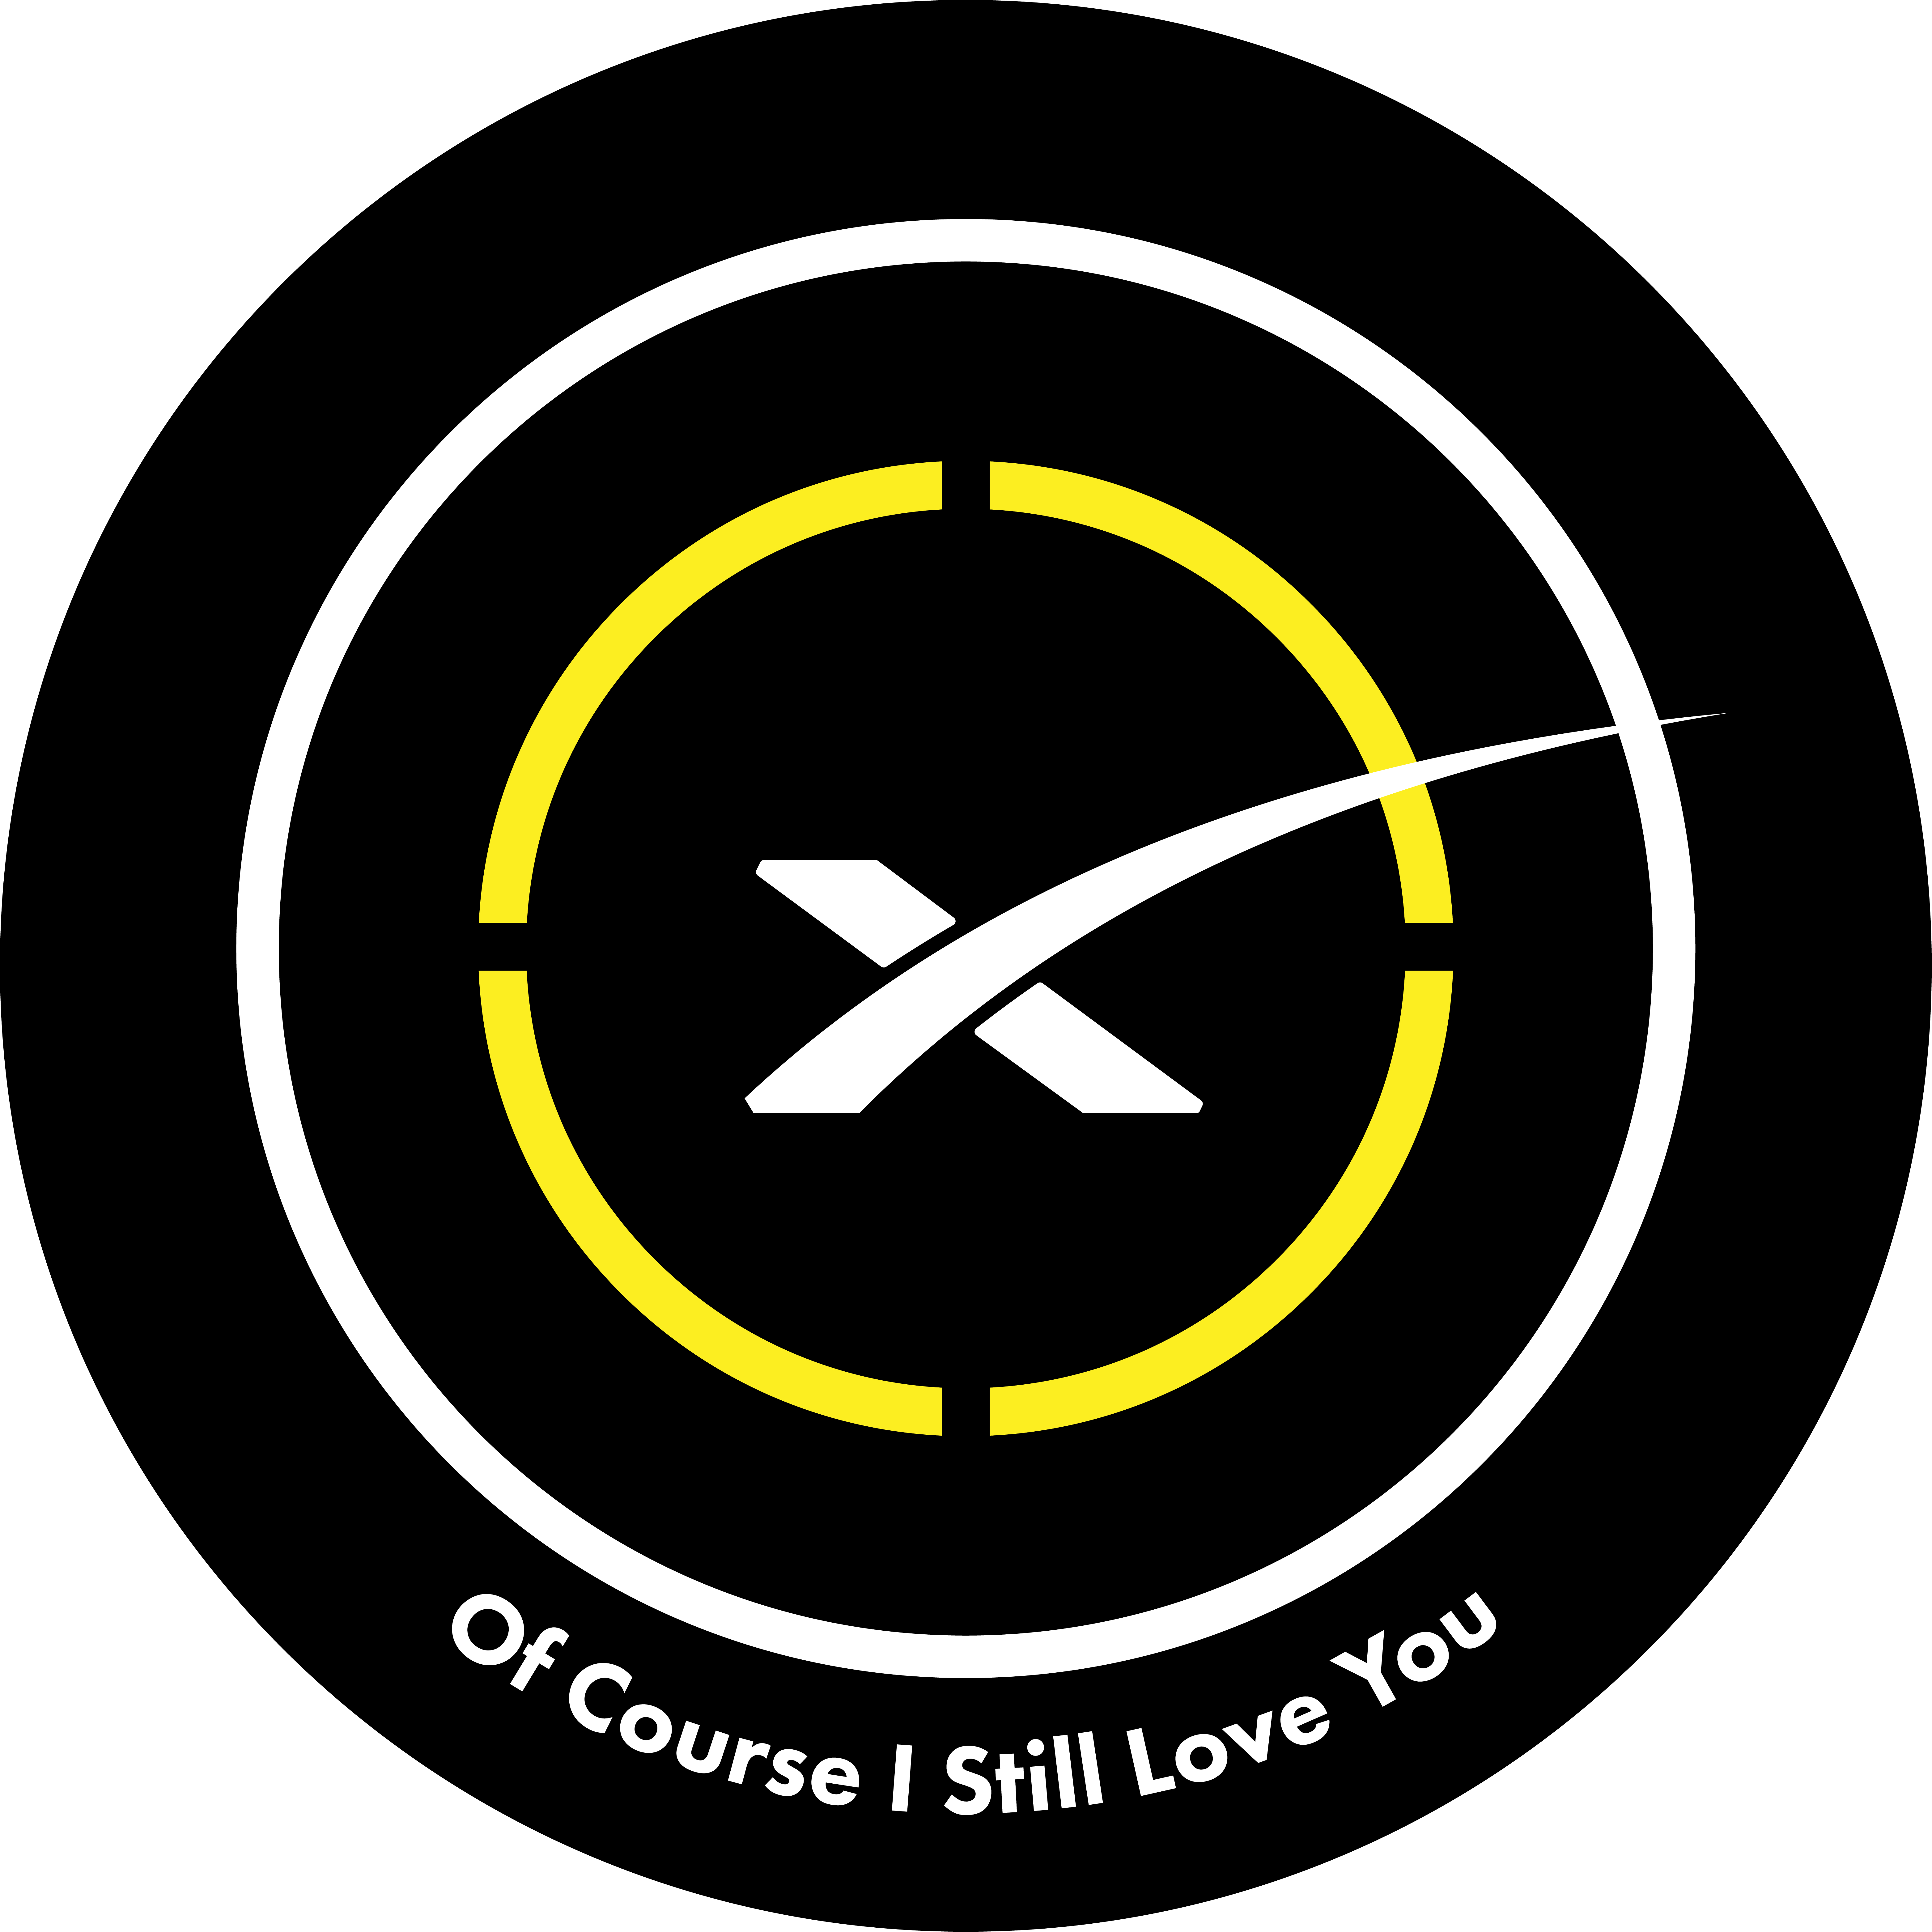 Of course we can. Of course i still Love you SPACEX. Of course i still Love you. Of course i still Love you платформа. SPACEX of course i still Love.